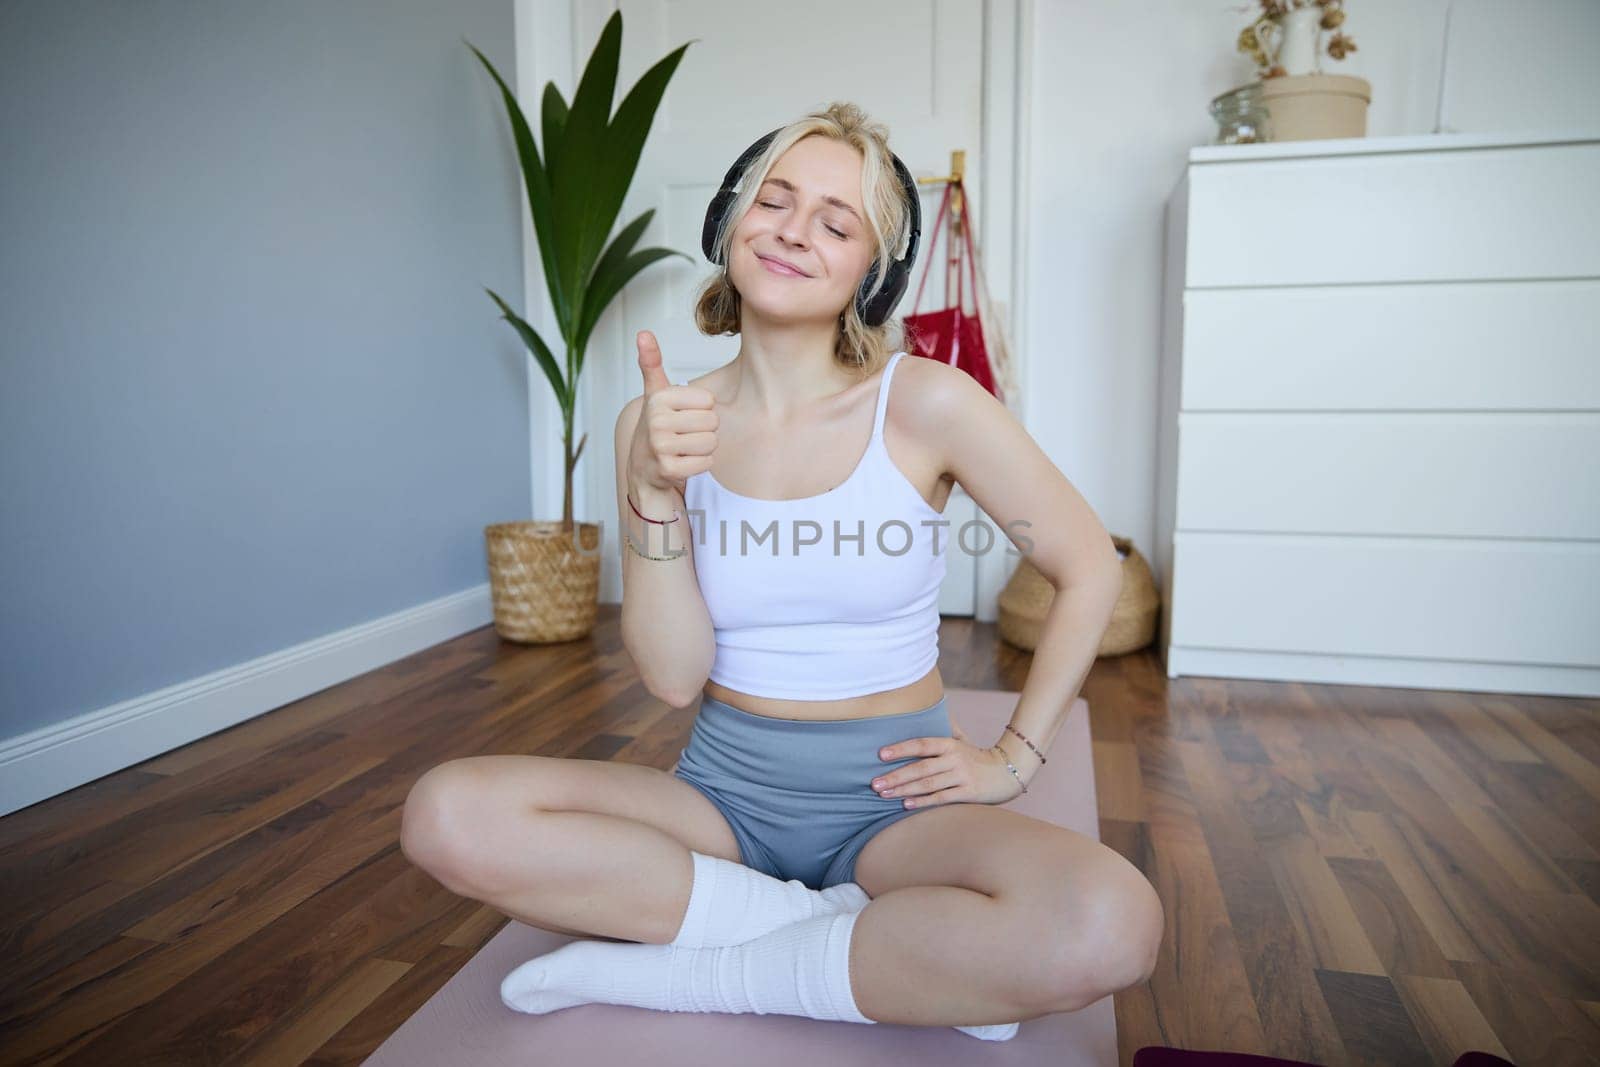 Portrait of happy, fit and healthy young woman sitting on yoga mat, wearing wireless headphones, showing thumbs up with satisfied face, pleased with workout training at home.